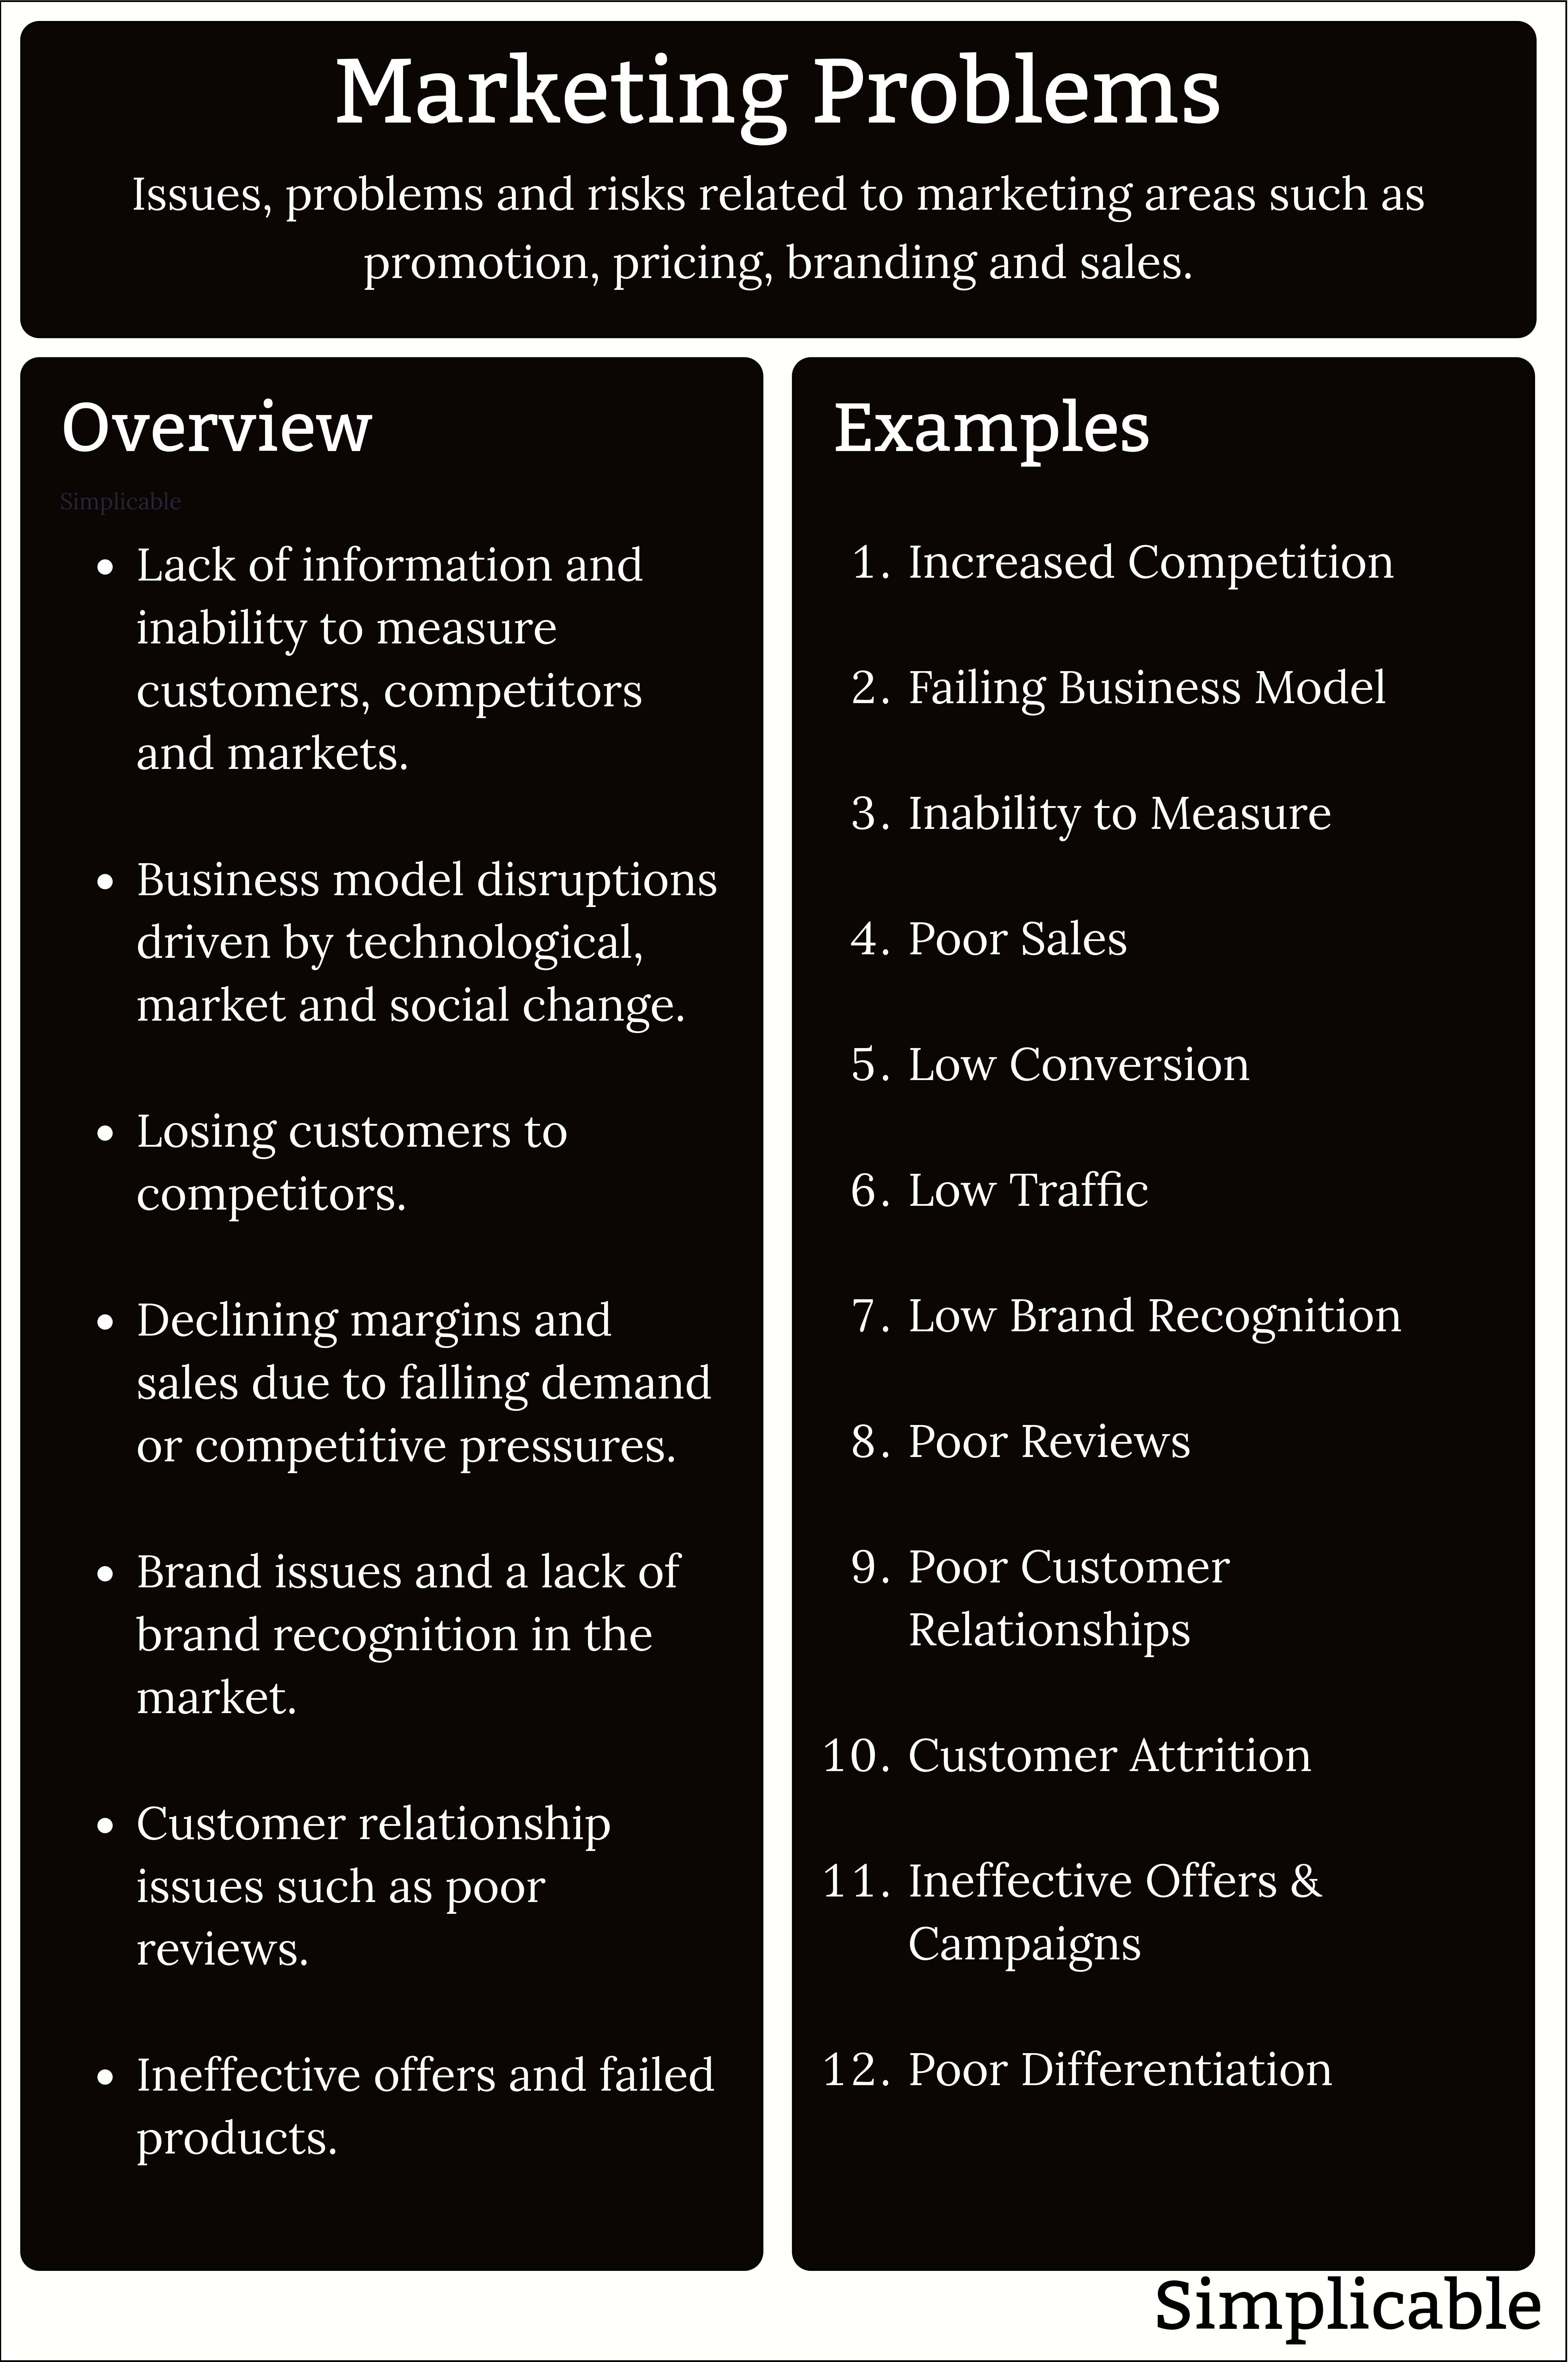 marketing problems overview and examples